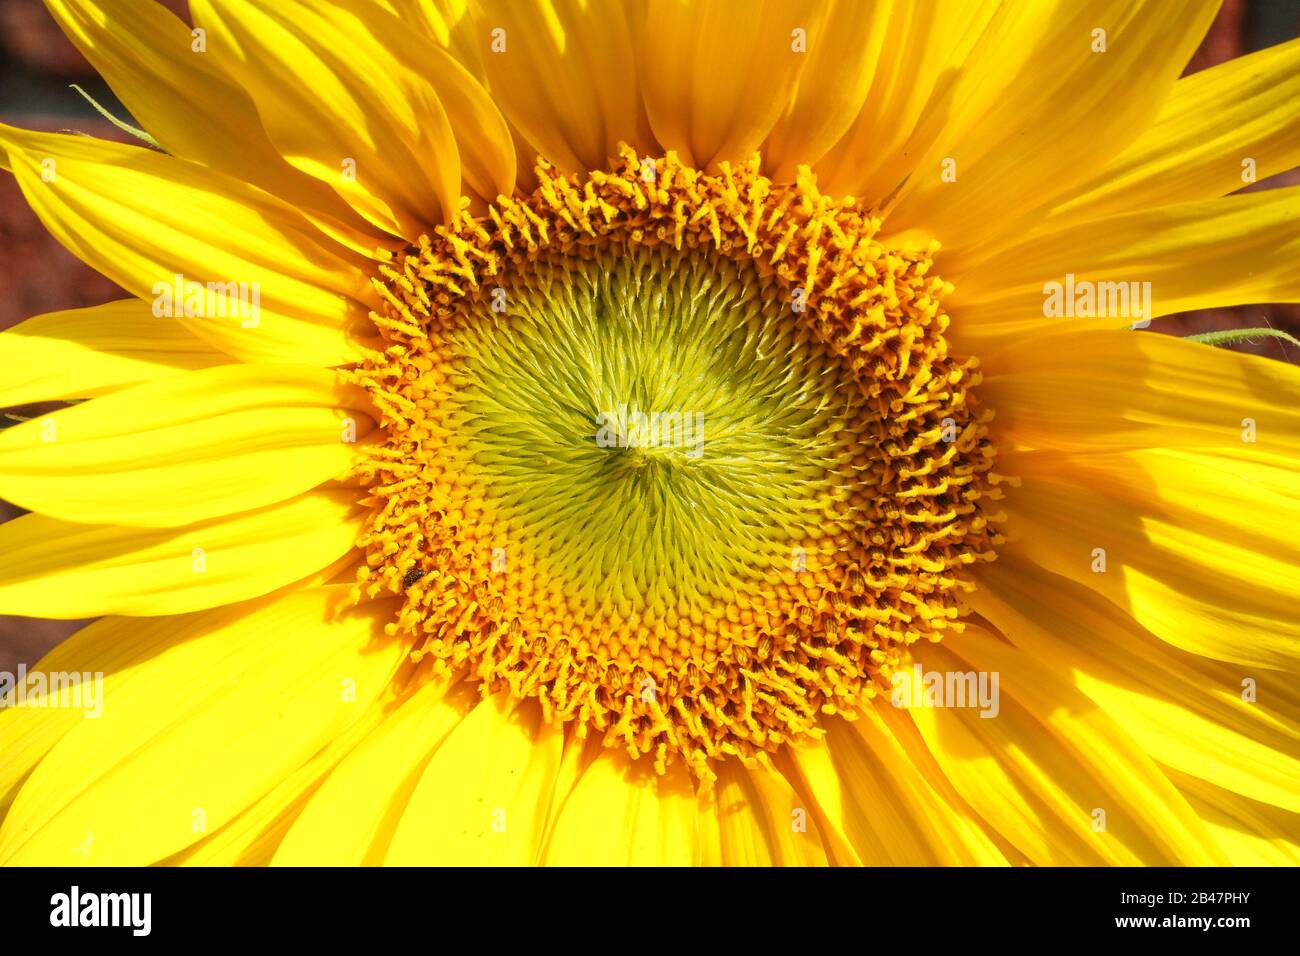 Close-up of a sunflower (helianthus) head and yellow disc florets in front of a red-brick wall on a bright sunny summer day. Stock Photo